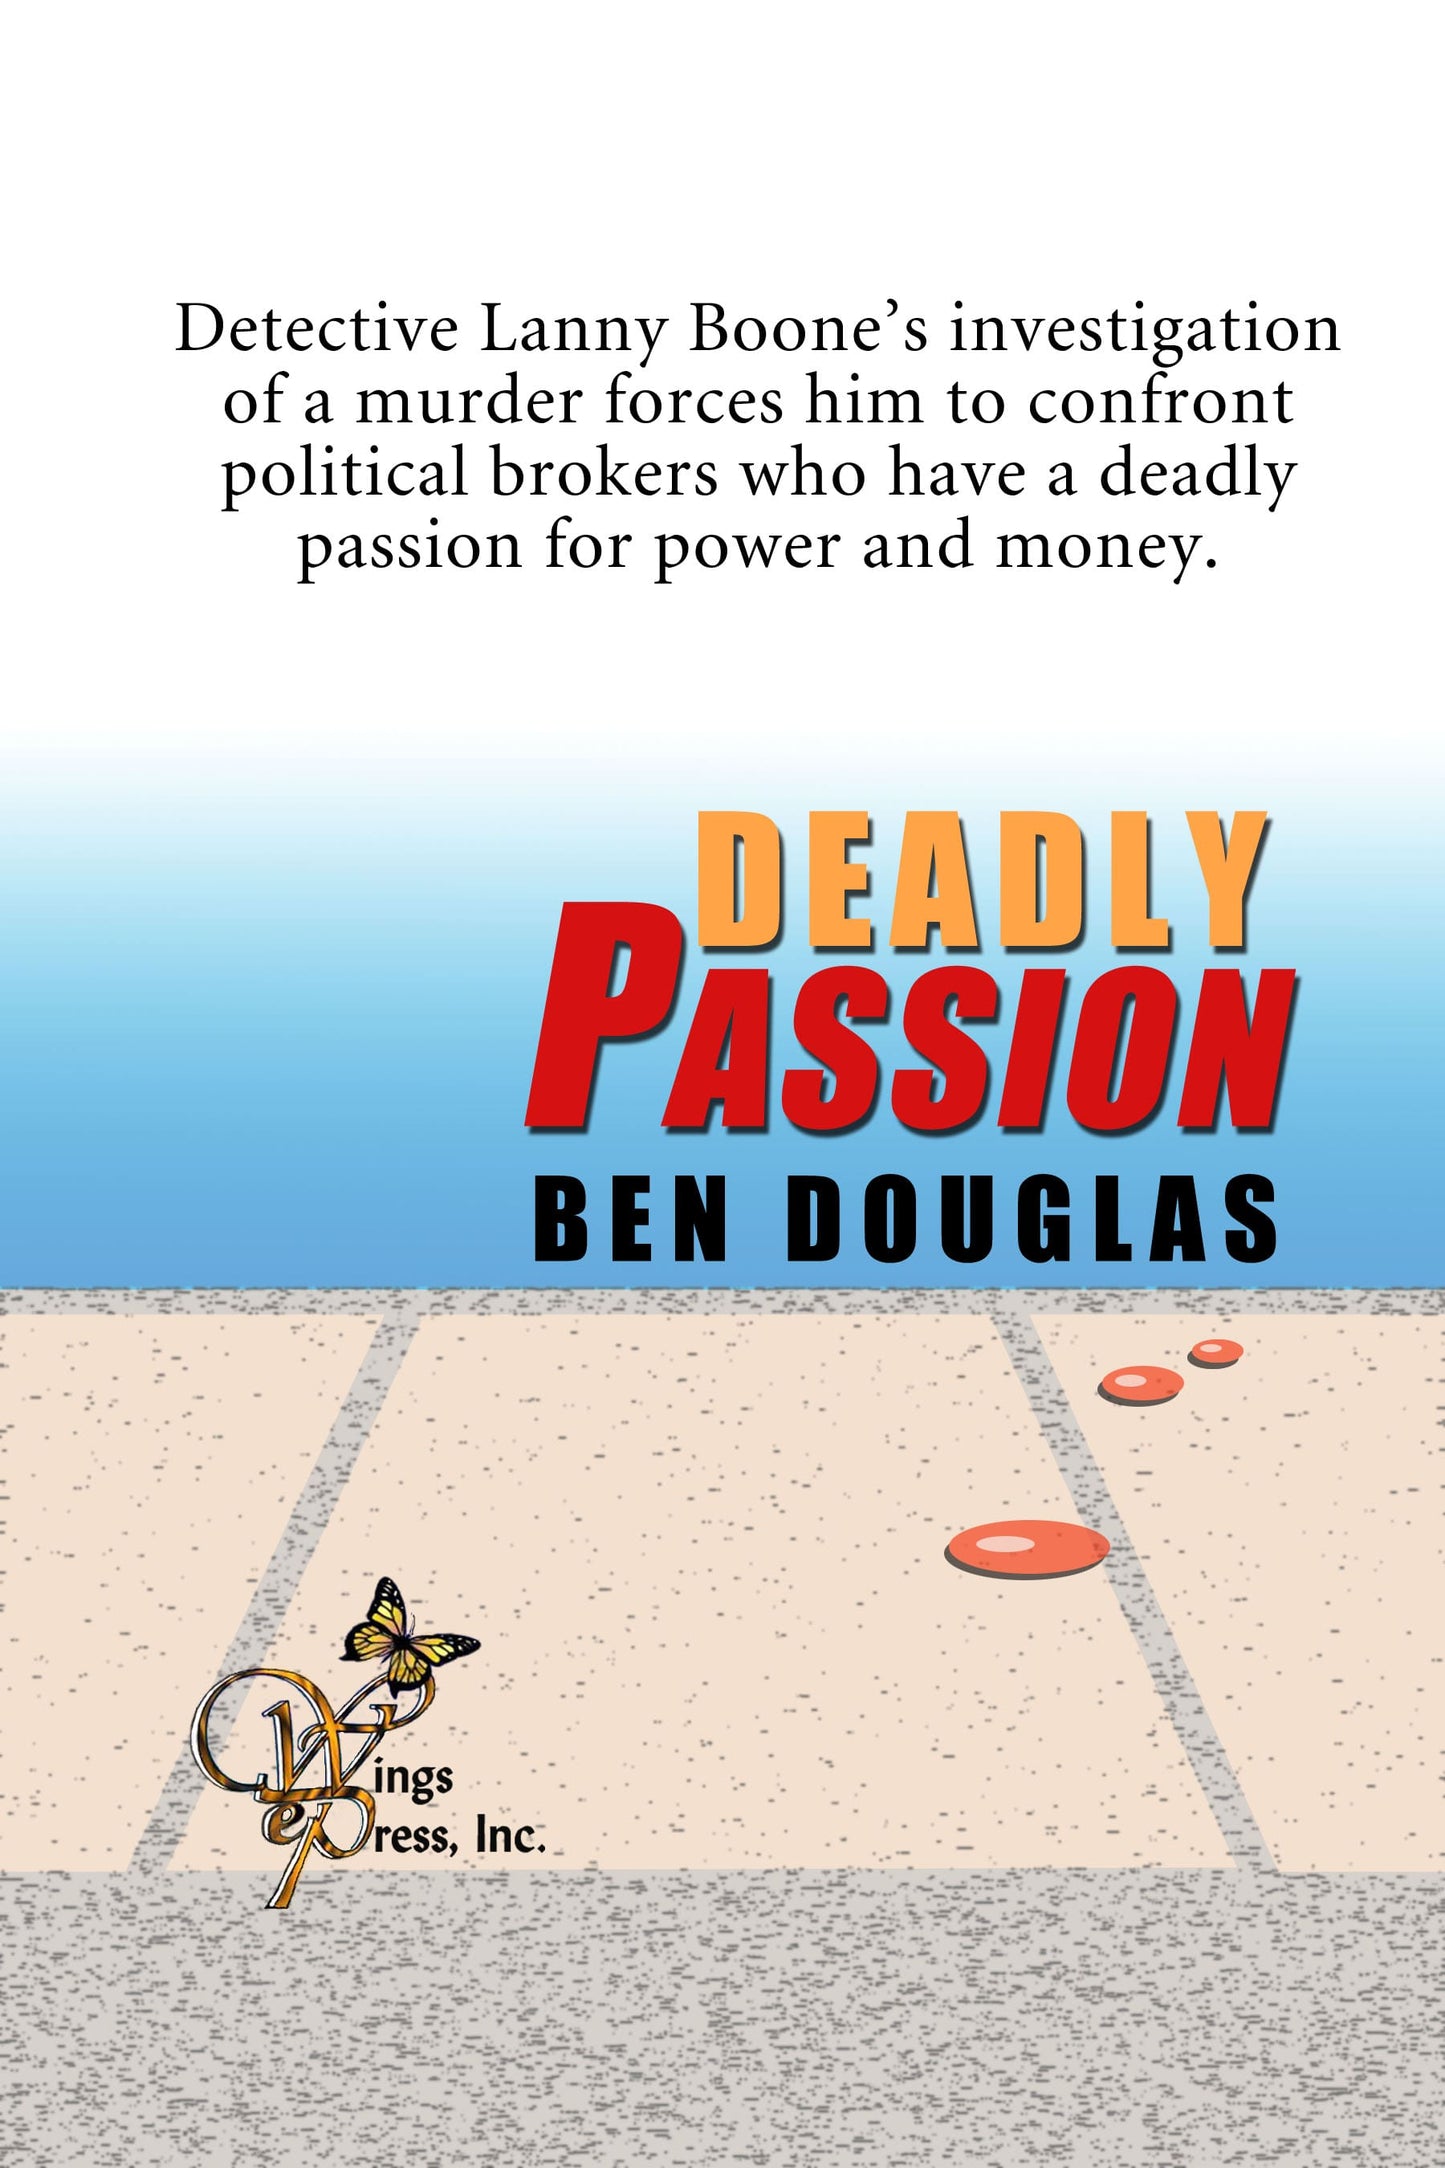 Deadly Passion (The Lanny Boone Series Book 2)